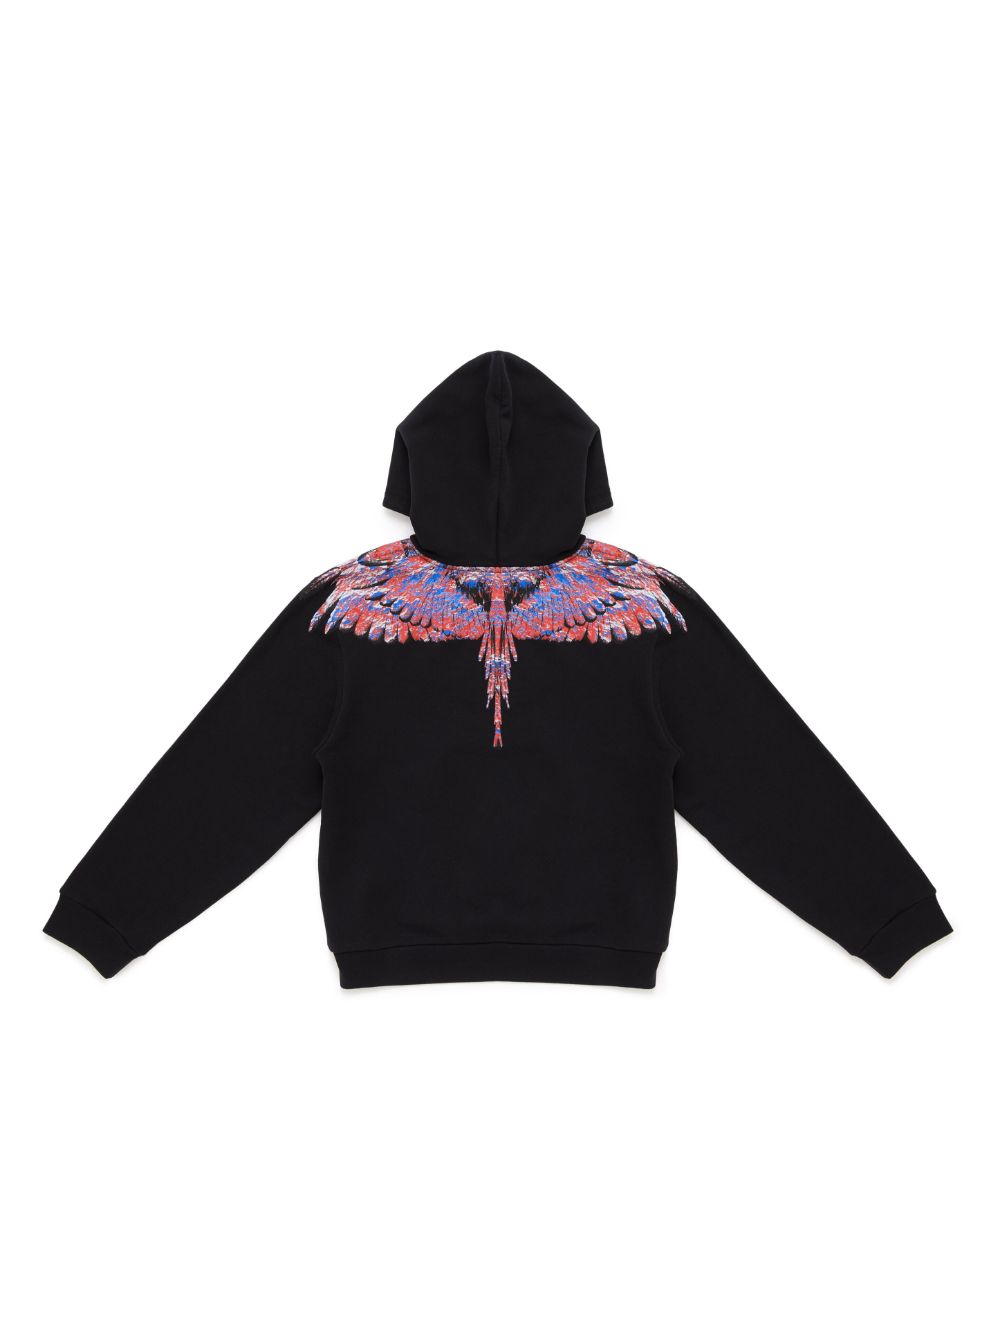 Black sweatshirt for boys with pink wings